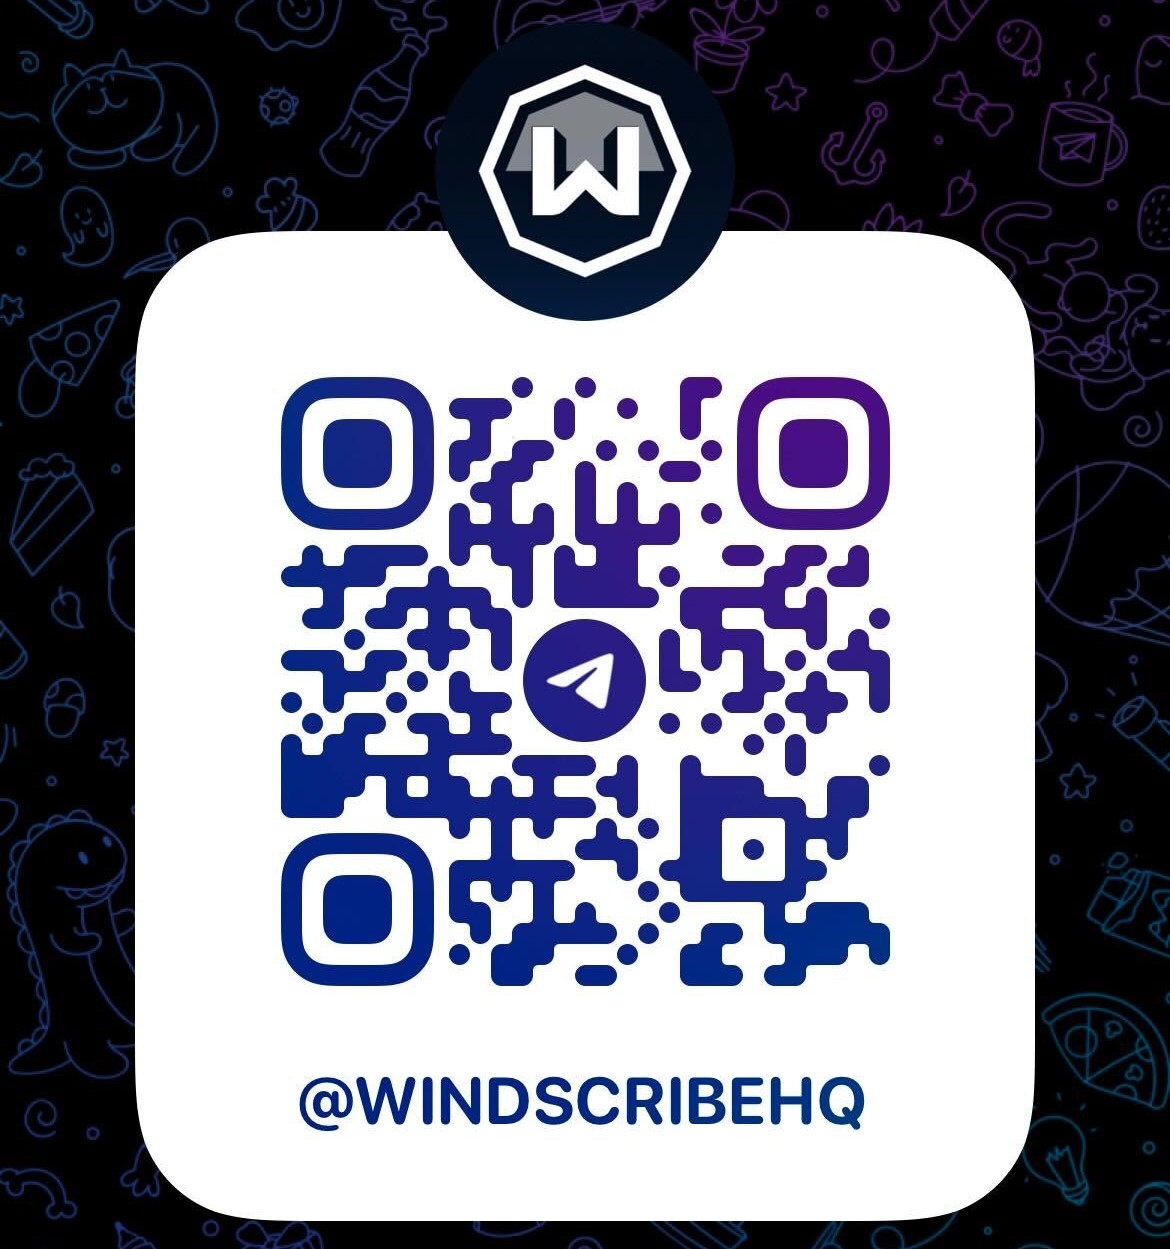 QR code to join Windscribe's Telegram channel